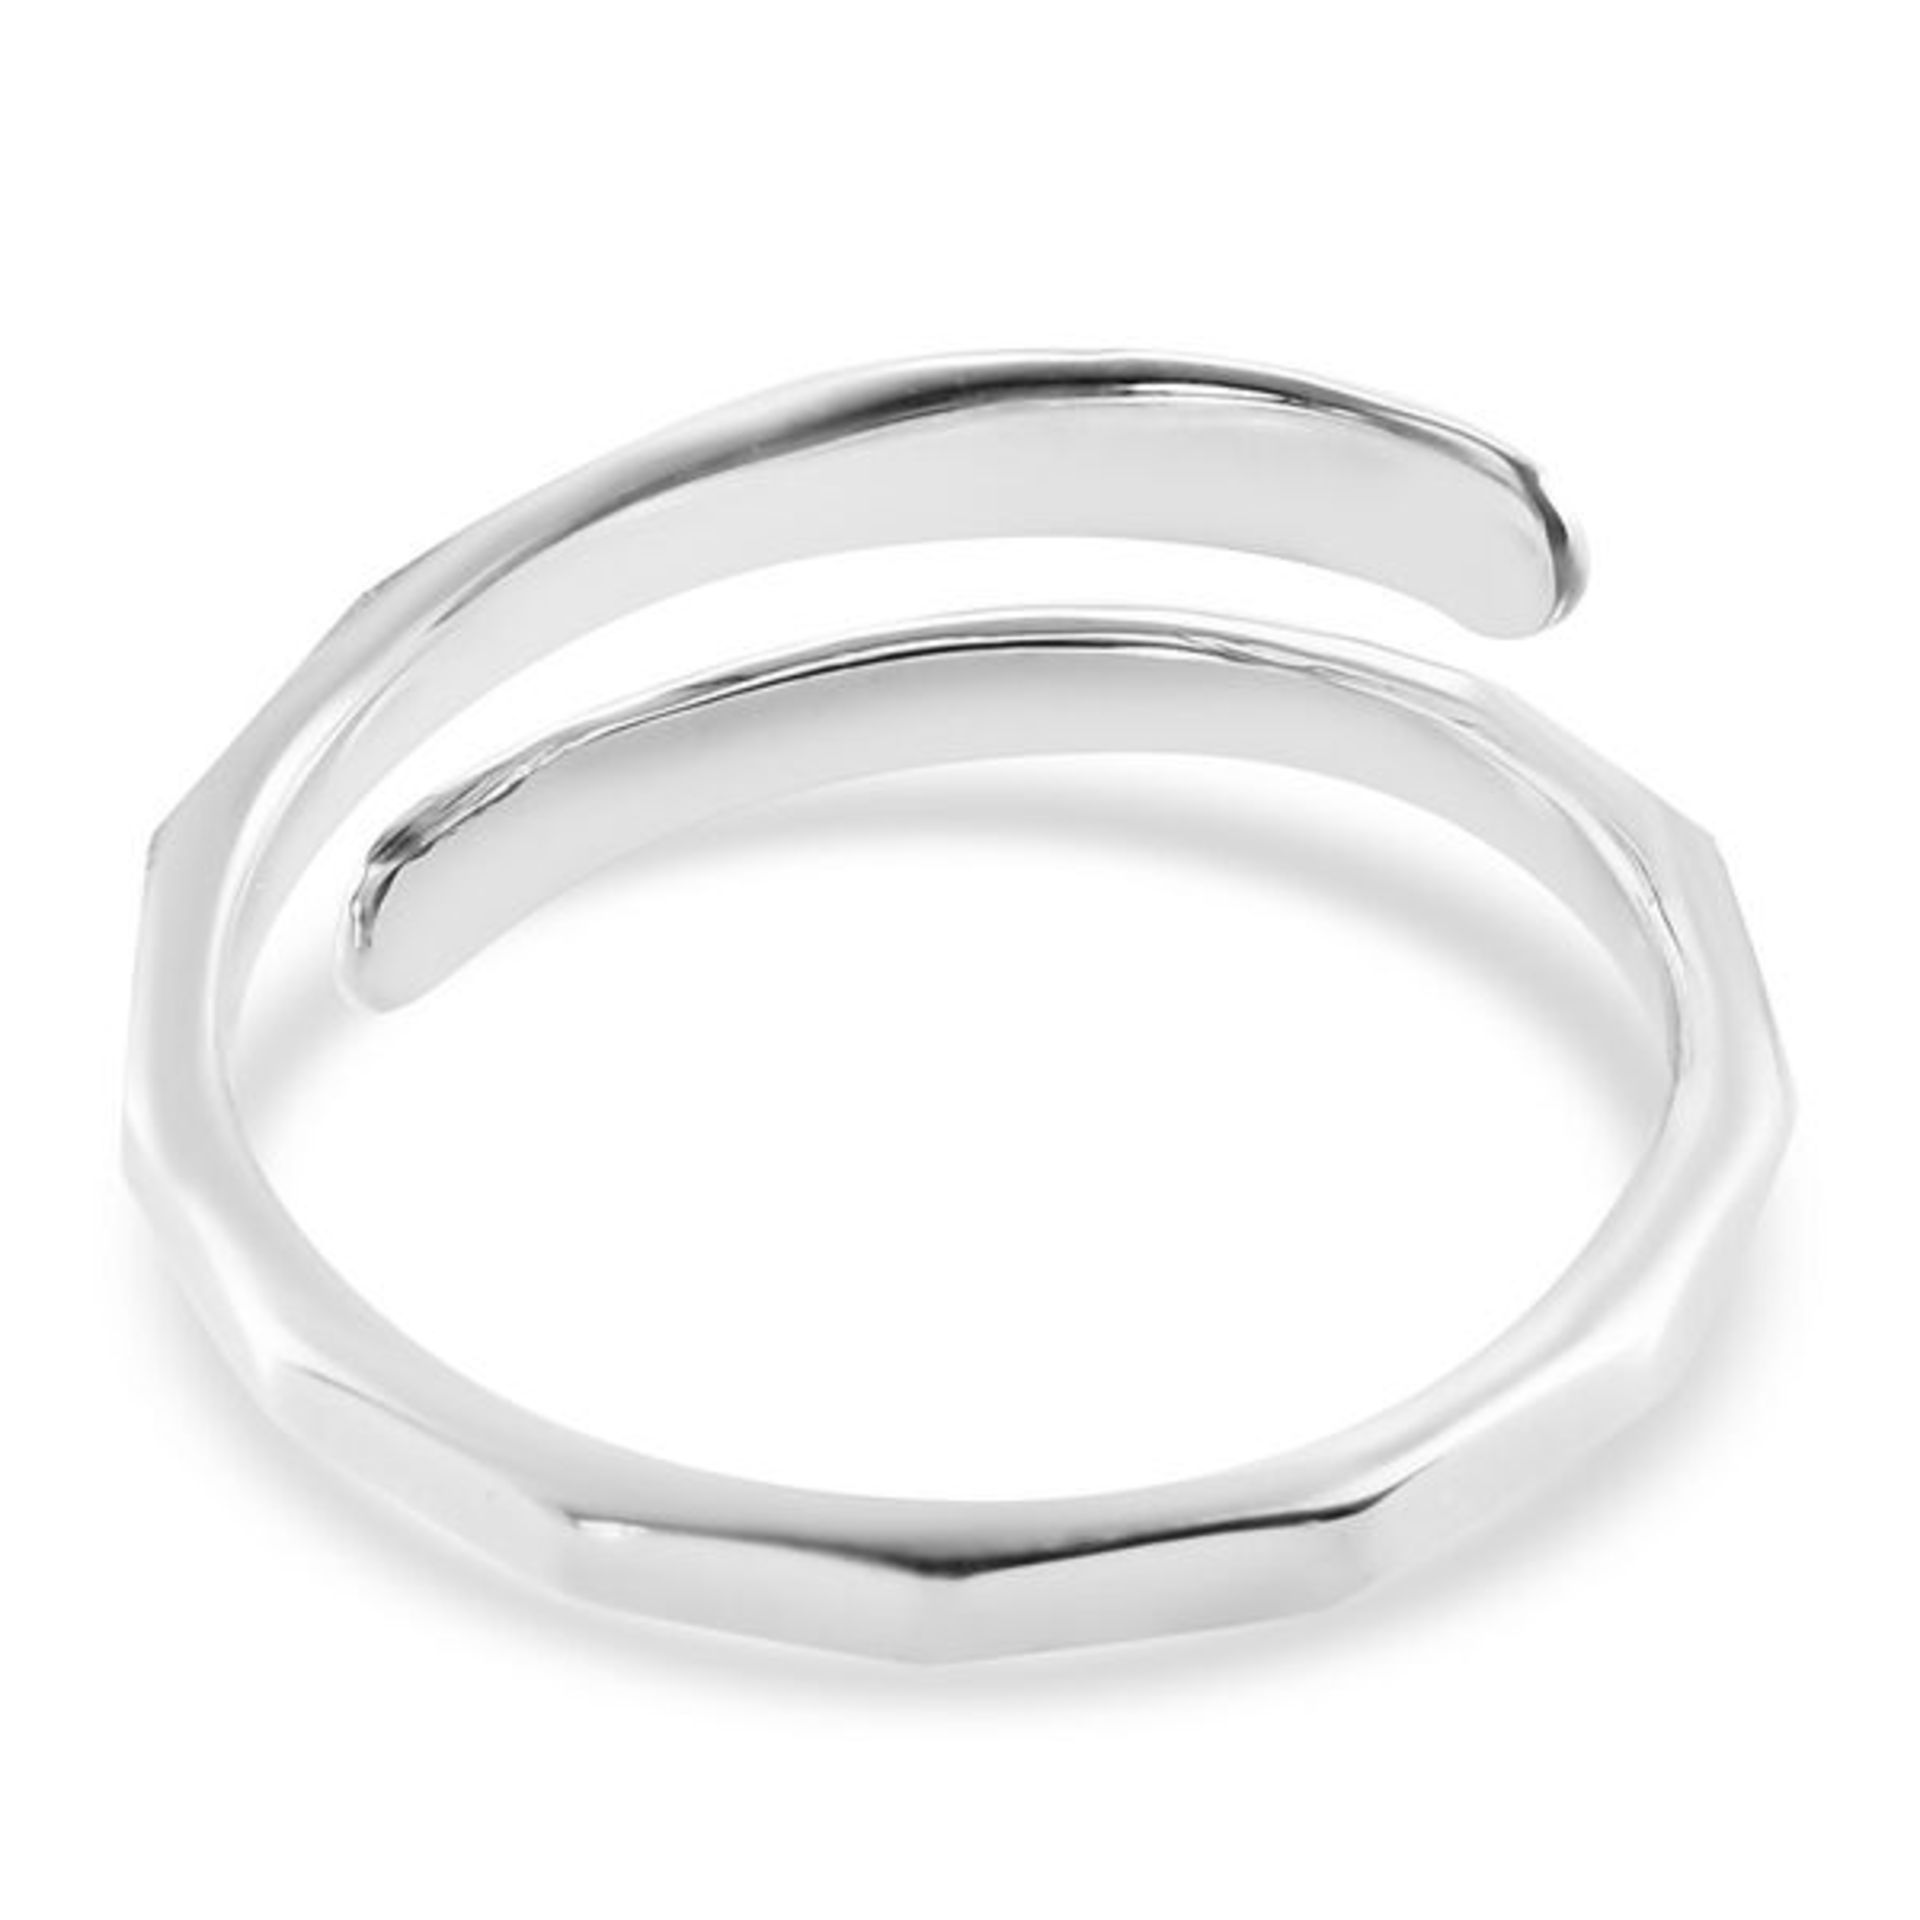 NEW!! Sterling Silver Coiled Plain Band Ring with Bevelled Edges - Image 3 of 3